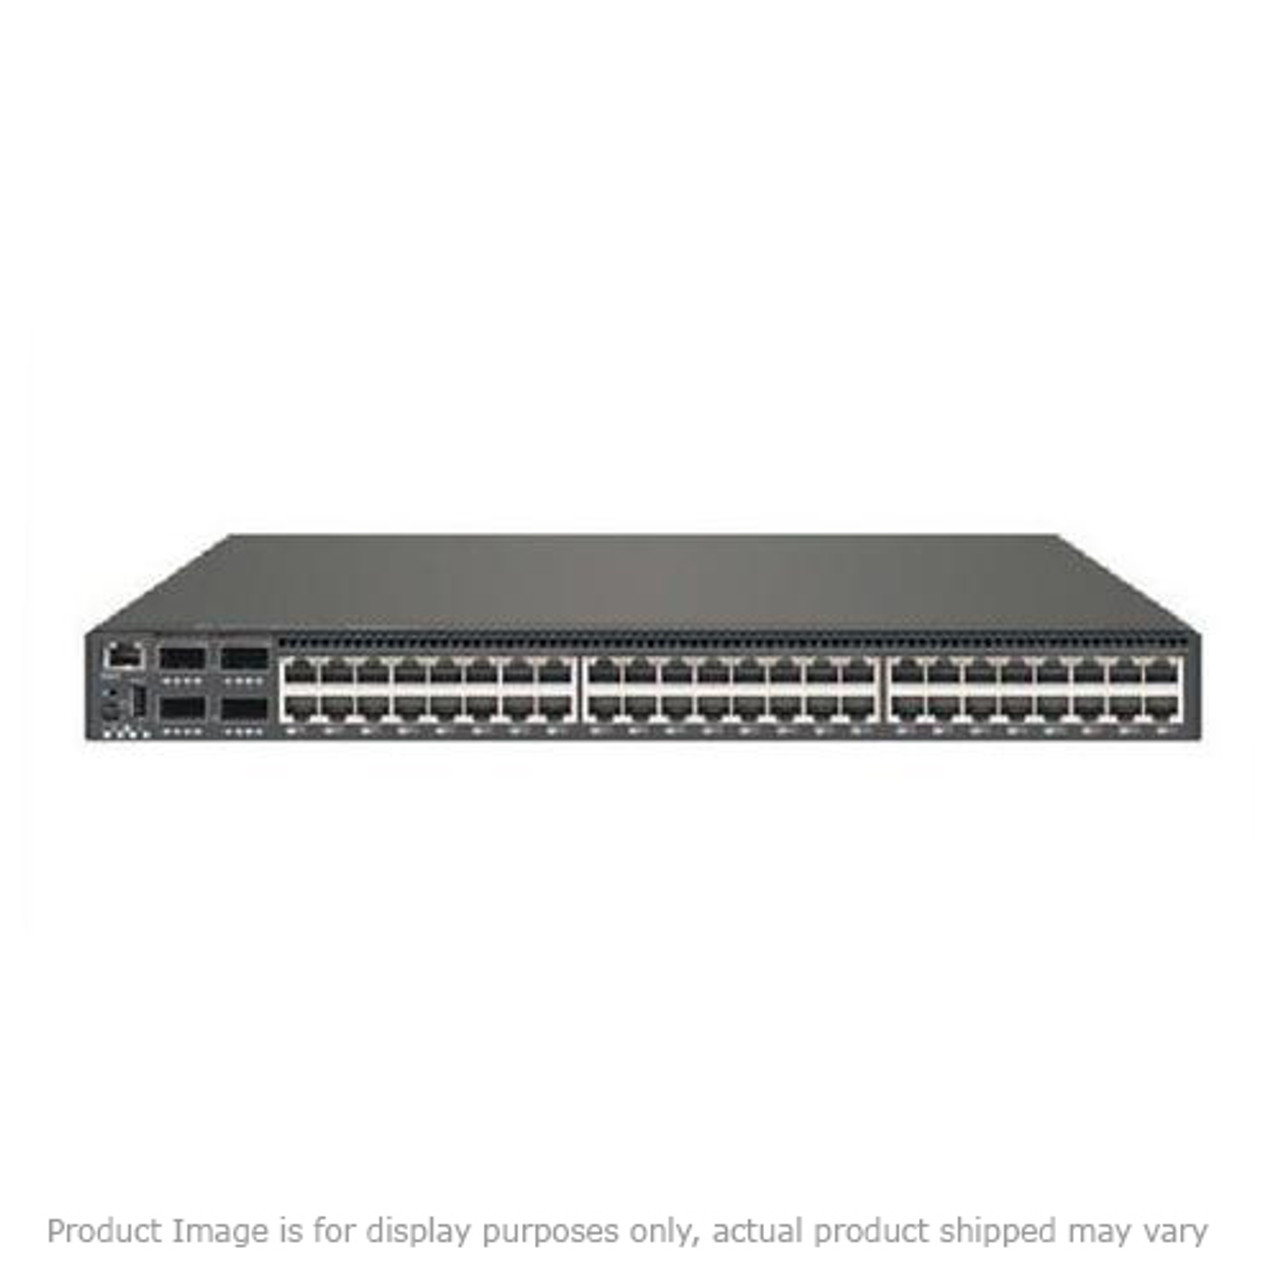 X1516A-Z Sun Terminal Server MRV Model LX-4048T 48-Ports for Sun Grid Rack System RoHS-5 Compliant (Refurbished)